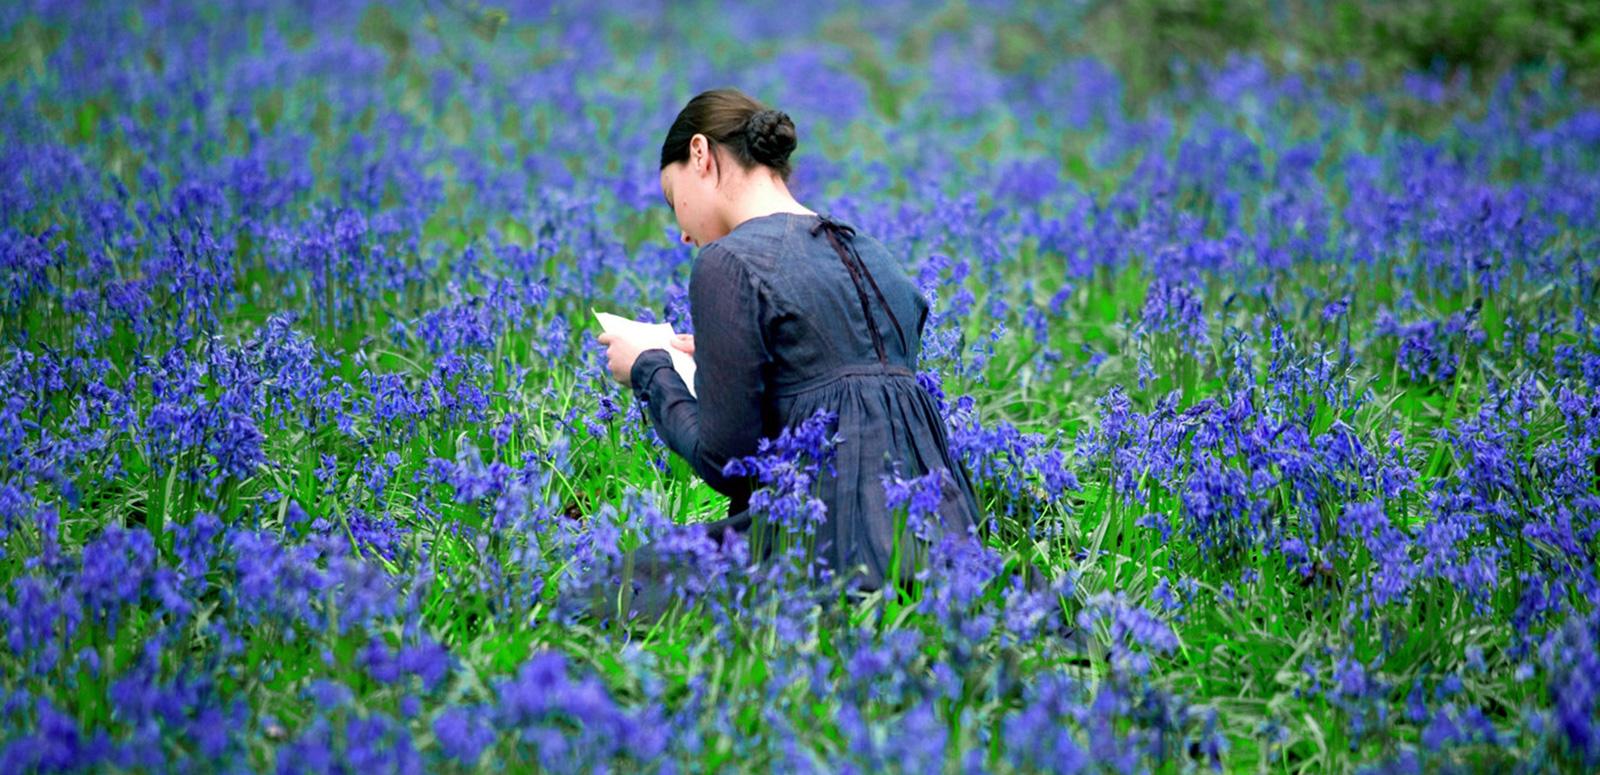 A girl sits in a field of bluebells reading a book with her back to the camera